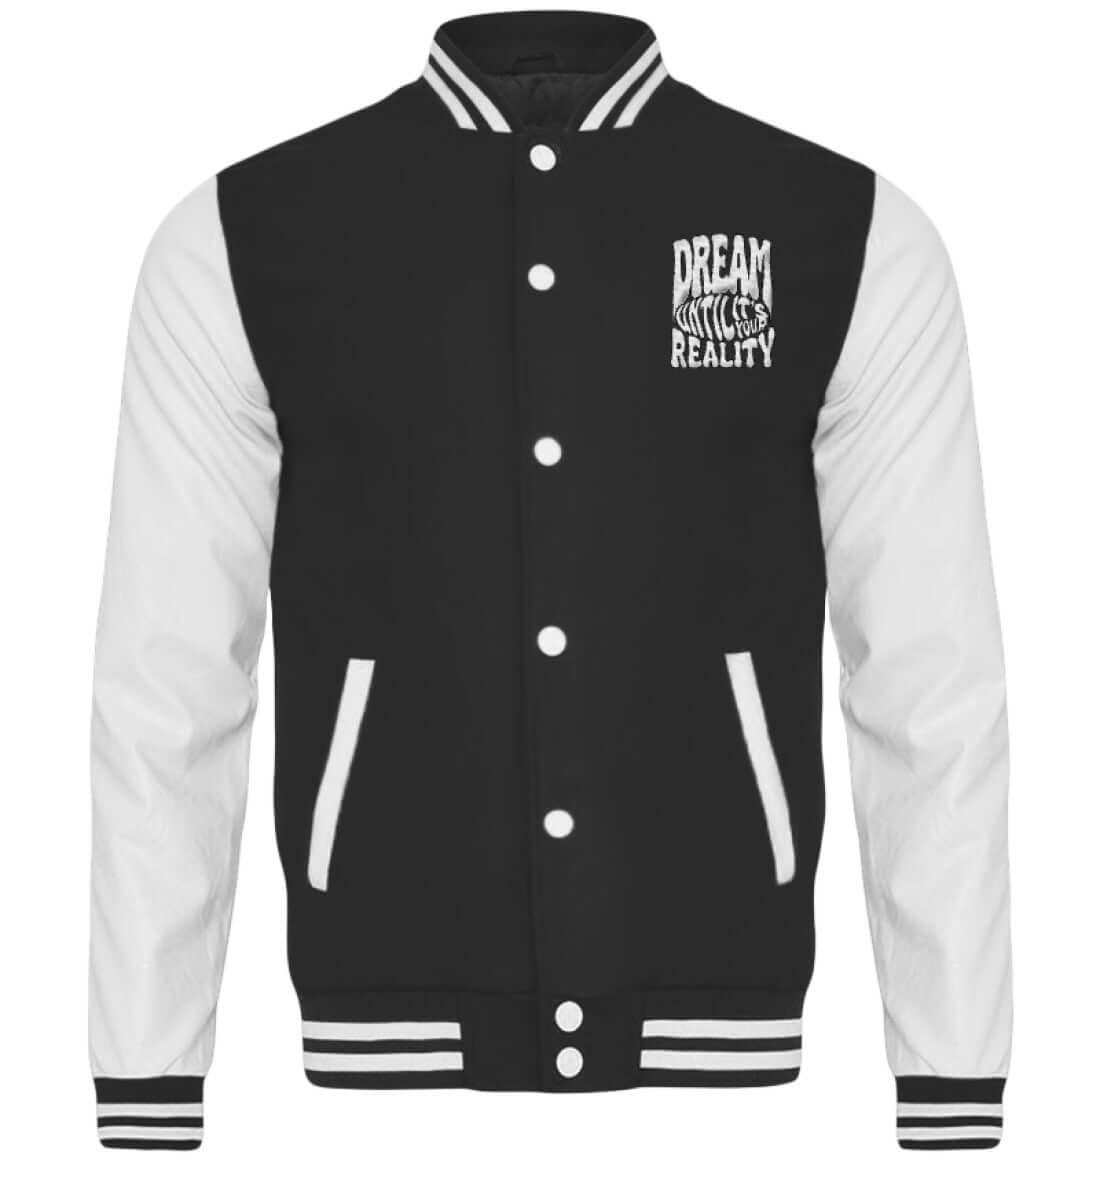 'DREAM UNTIL IT'S YOUR REALITY' COLLEGE-JACKET